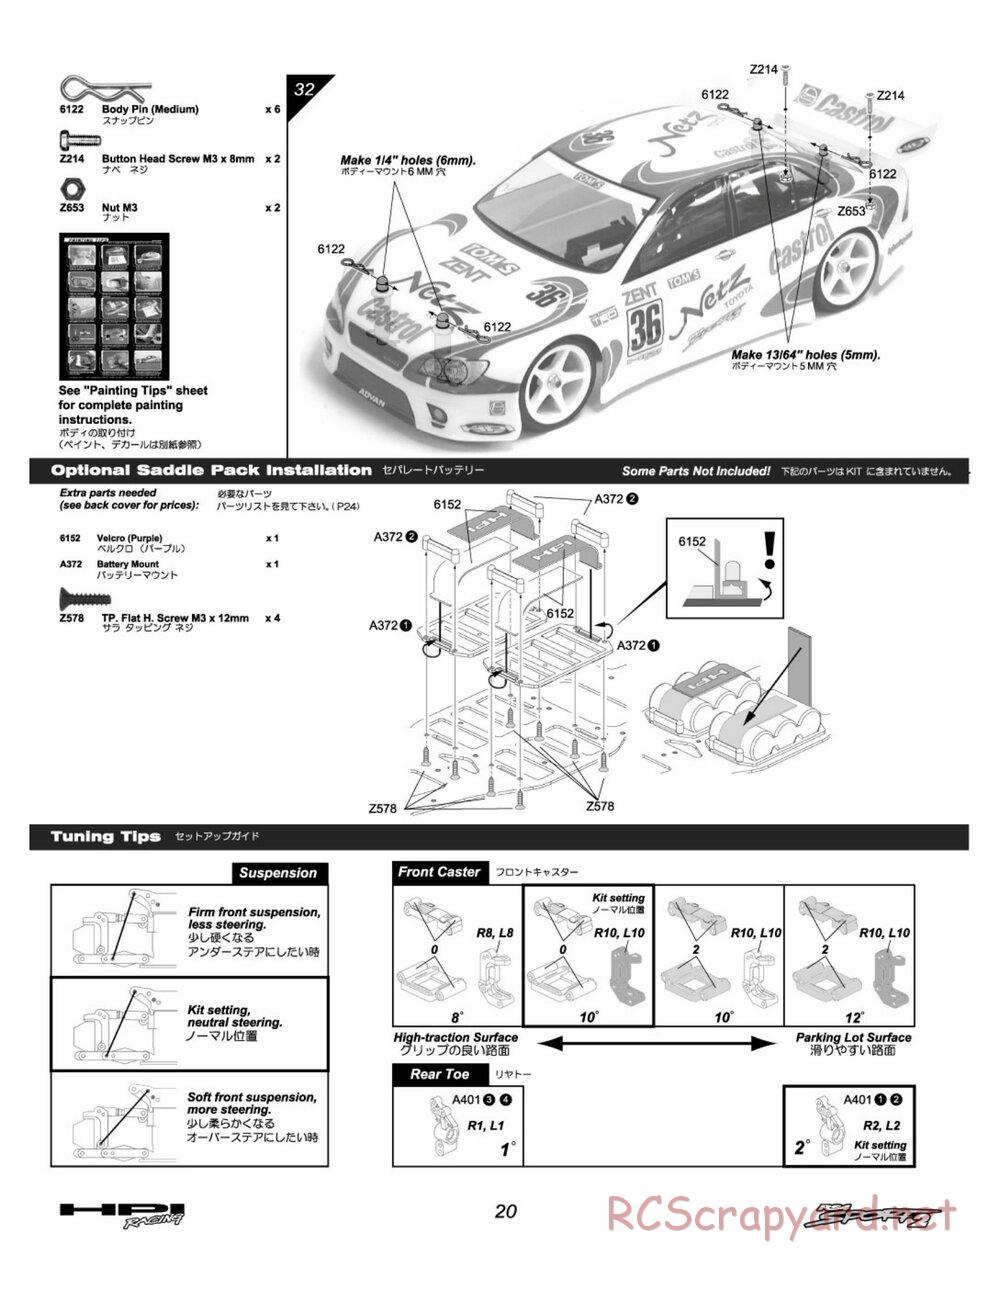 HPI - RS4 Sport 2 - Manual - Page 20